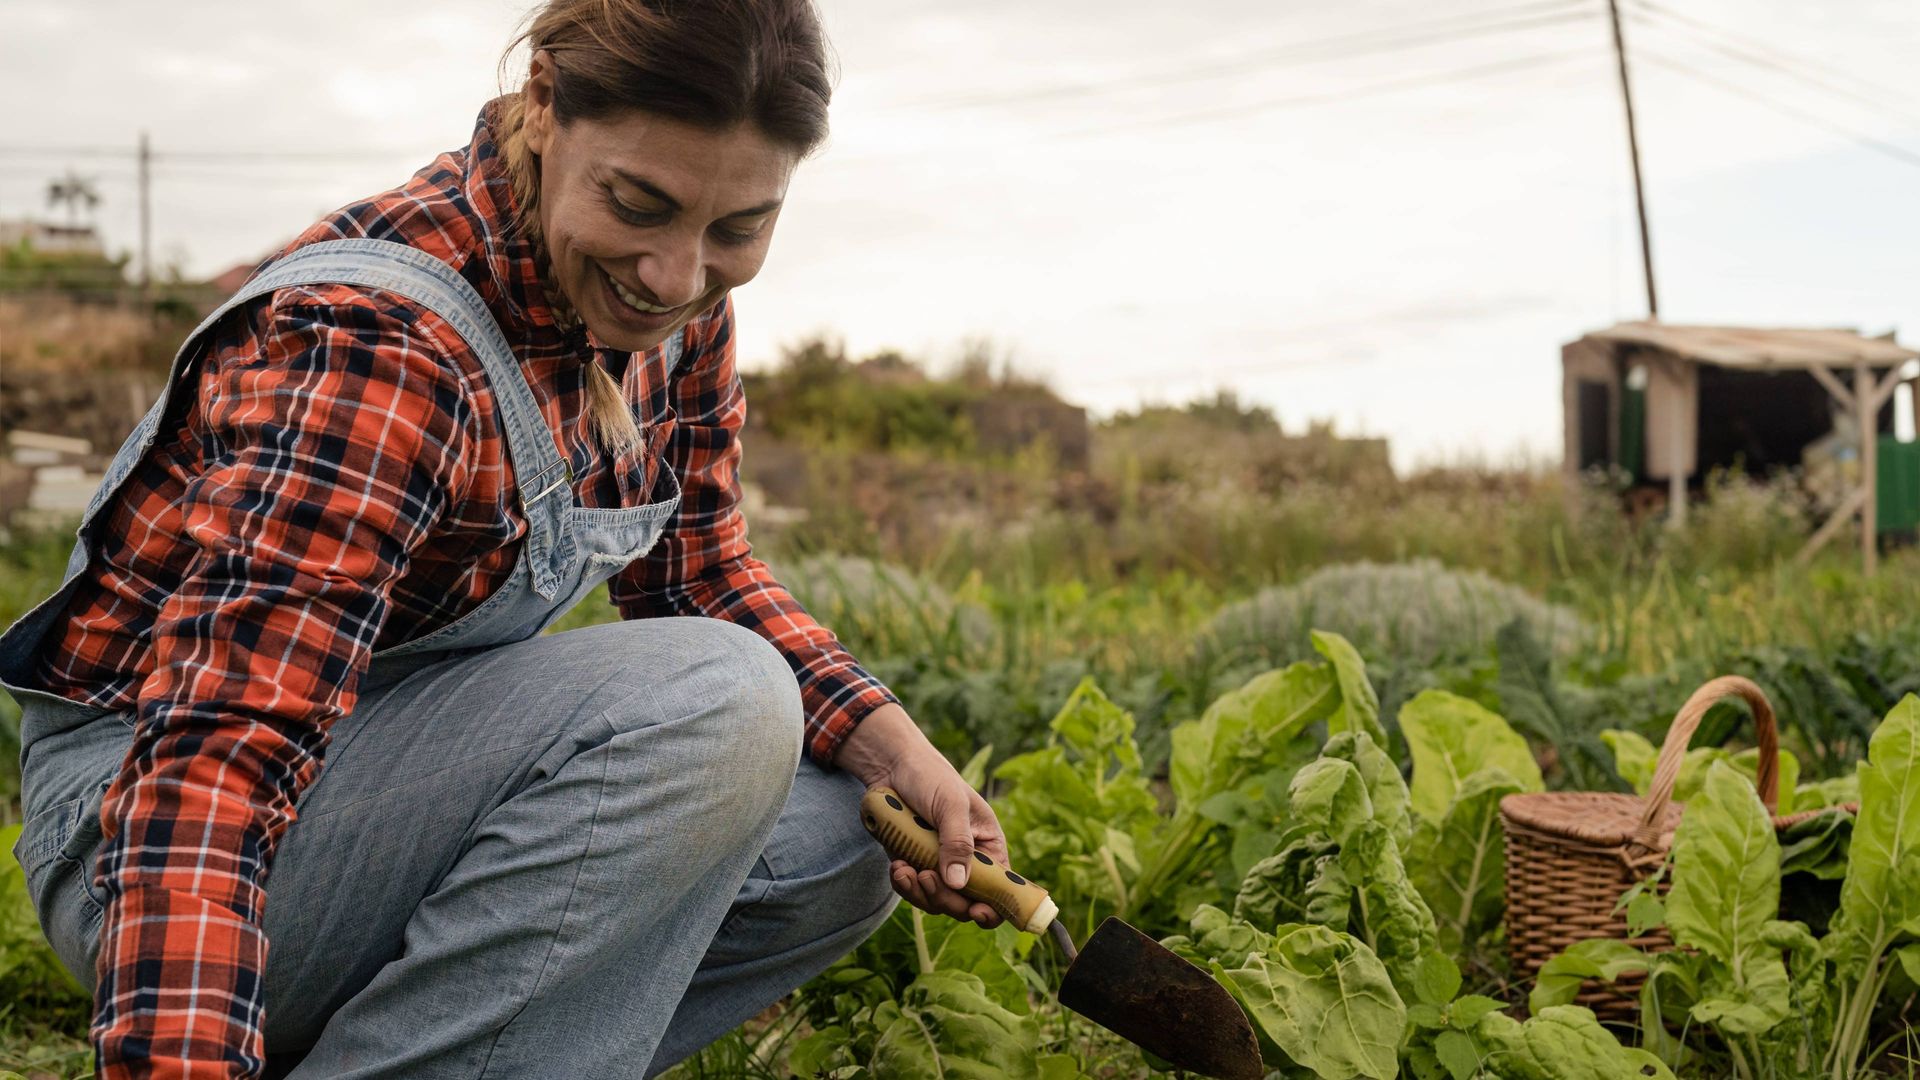 Image of a worker harvesting lettuce in a field